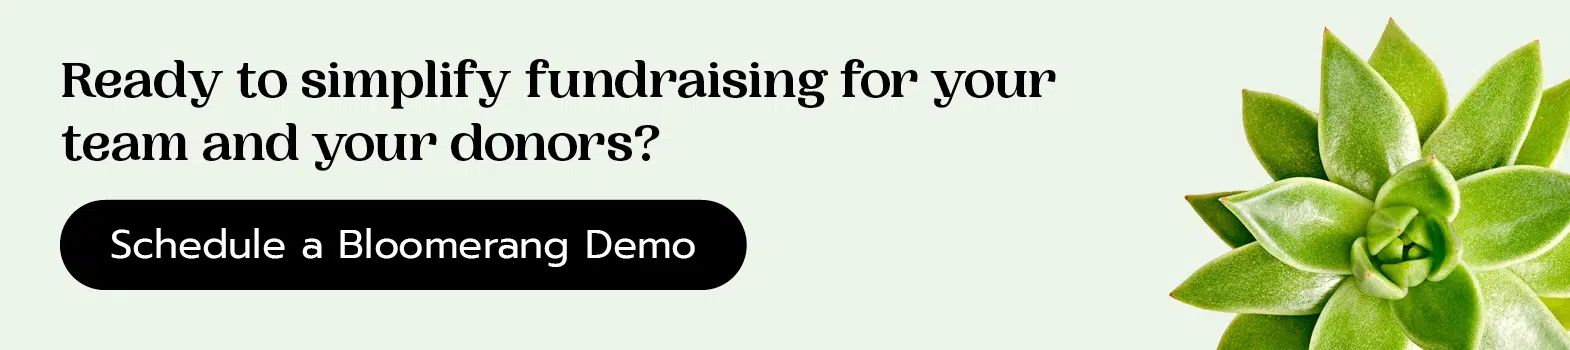 Ready to simplify fundraising for your team and your donors? Schedule a Bloomerang demo by clicking here.